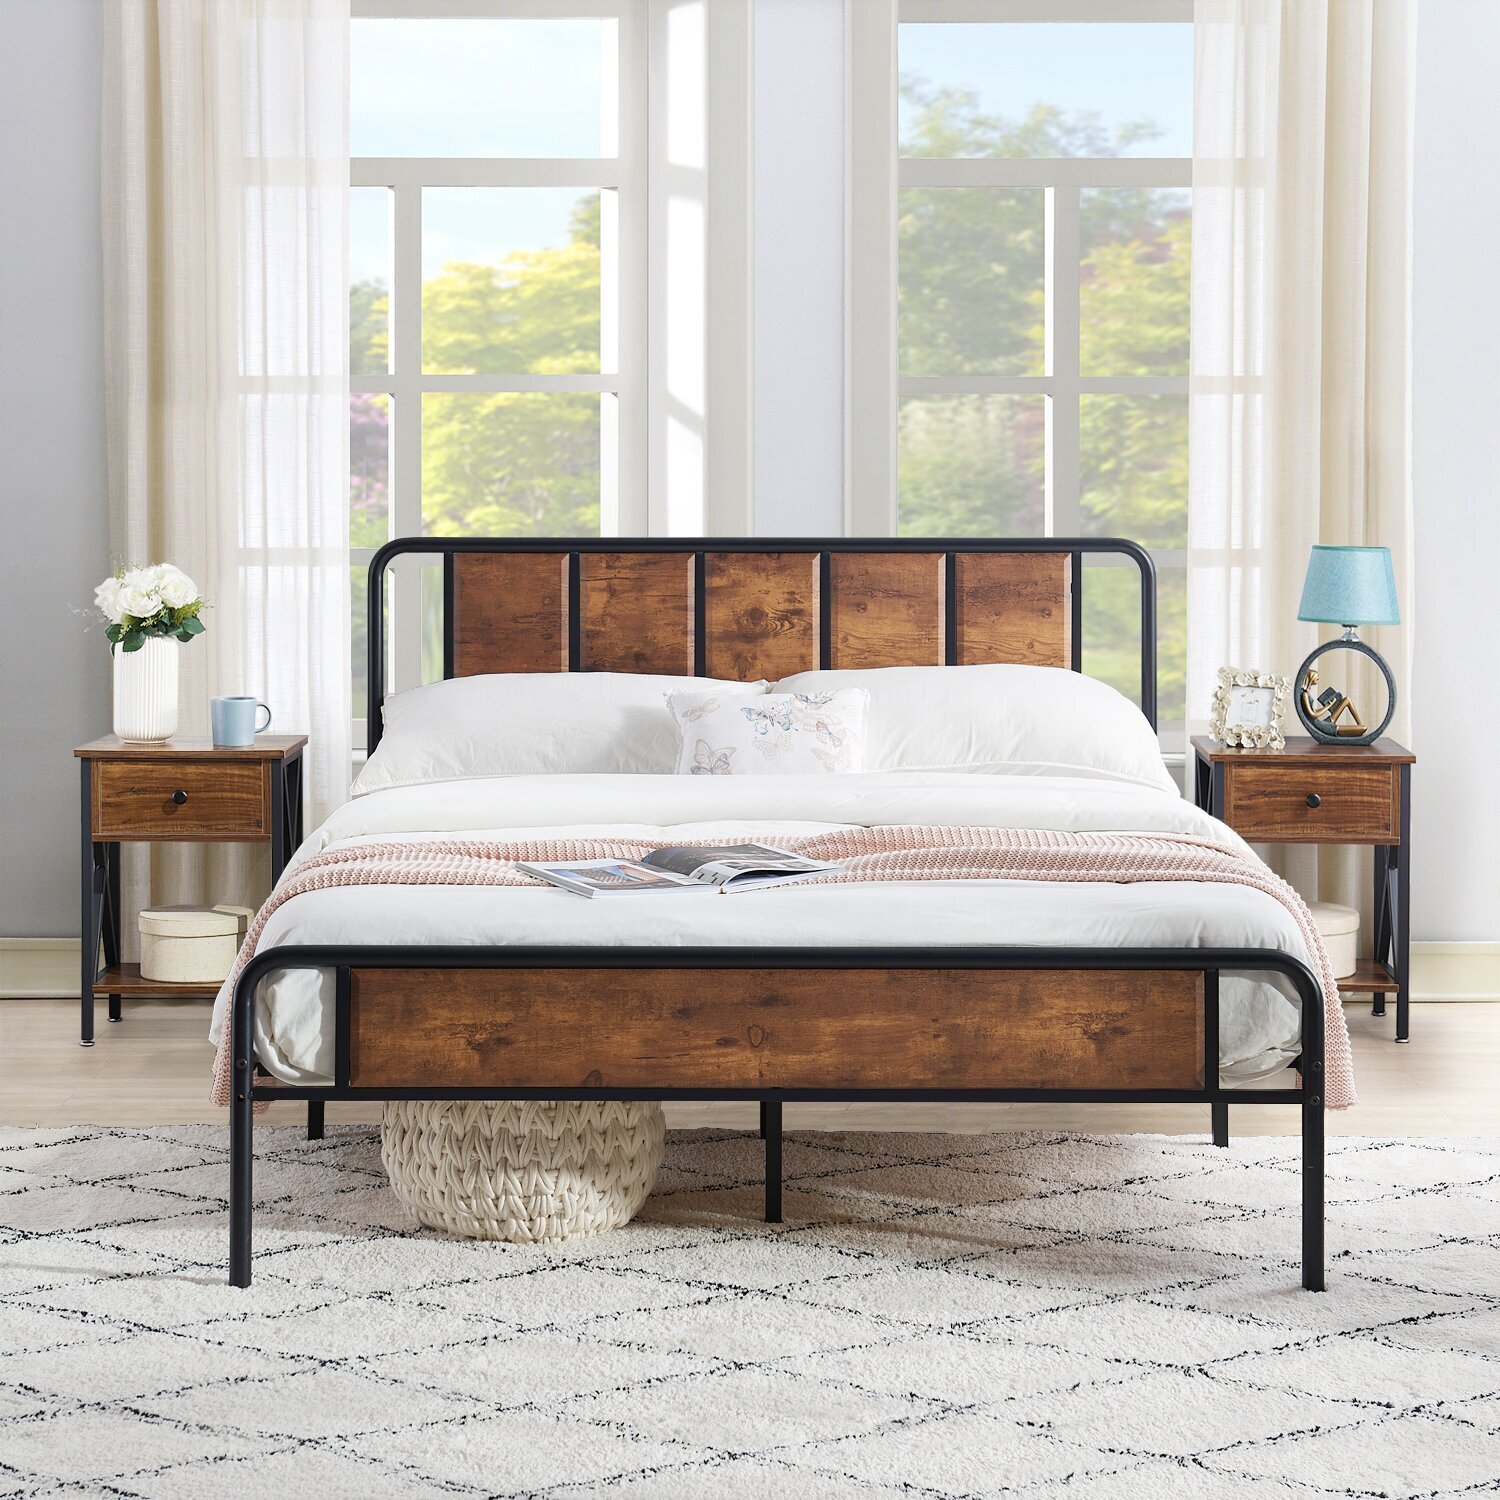 Classic Industrial Wood and Metal Bedset